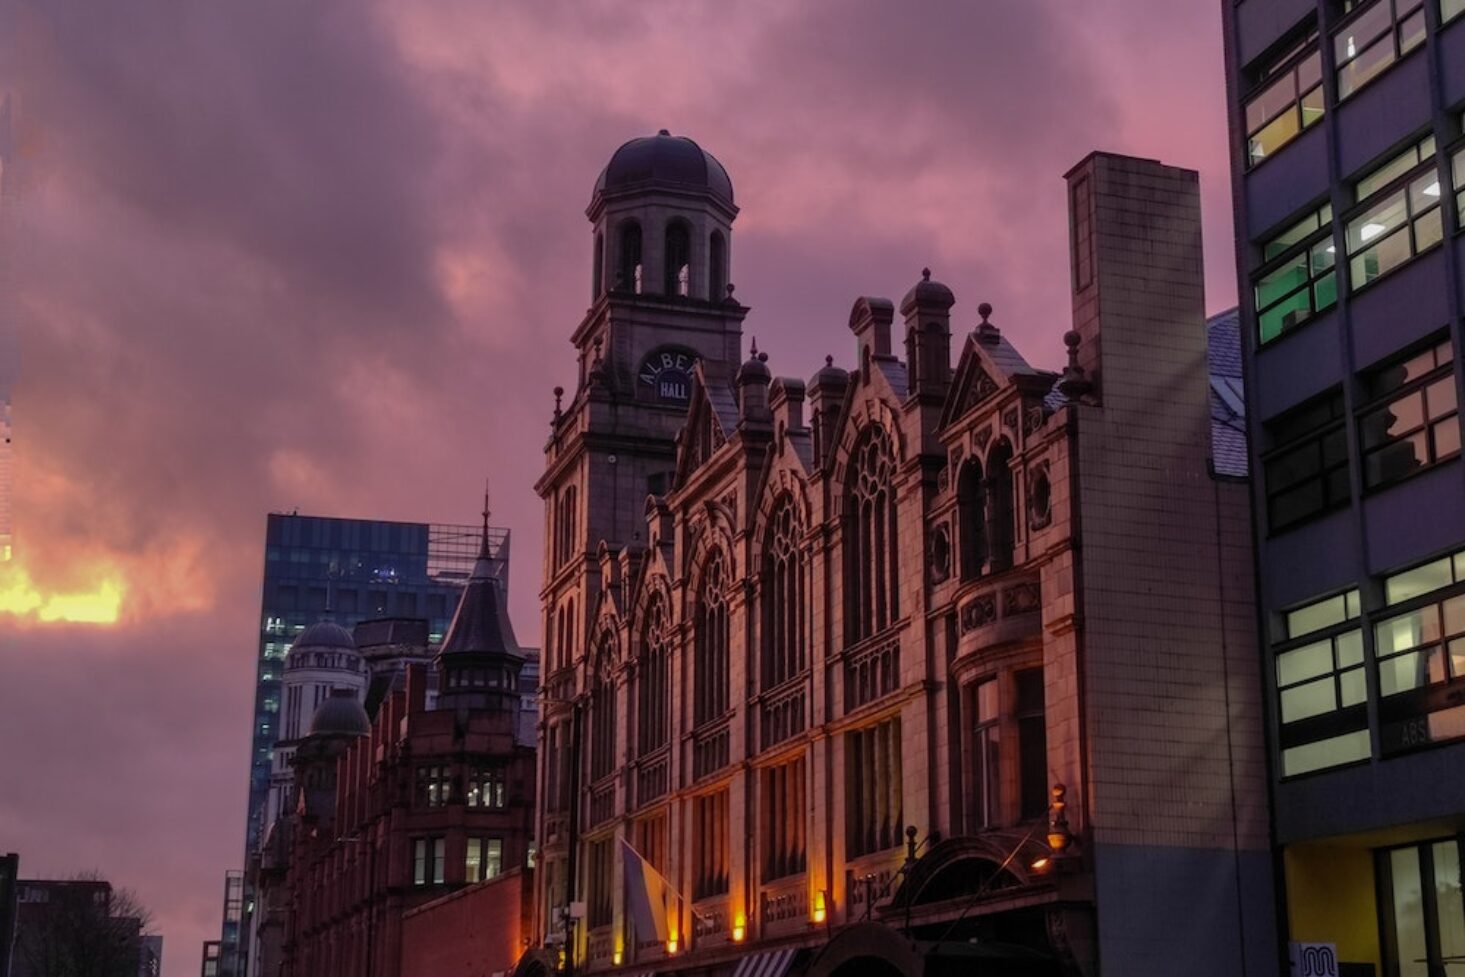 Manchester Attractions for Photography Lovers